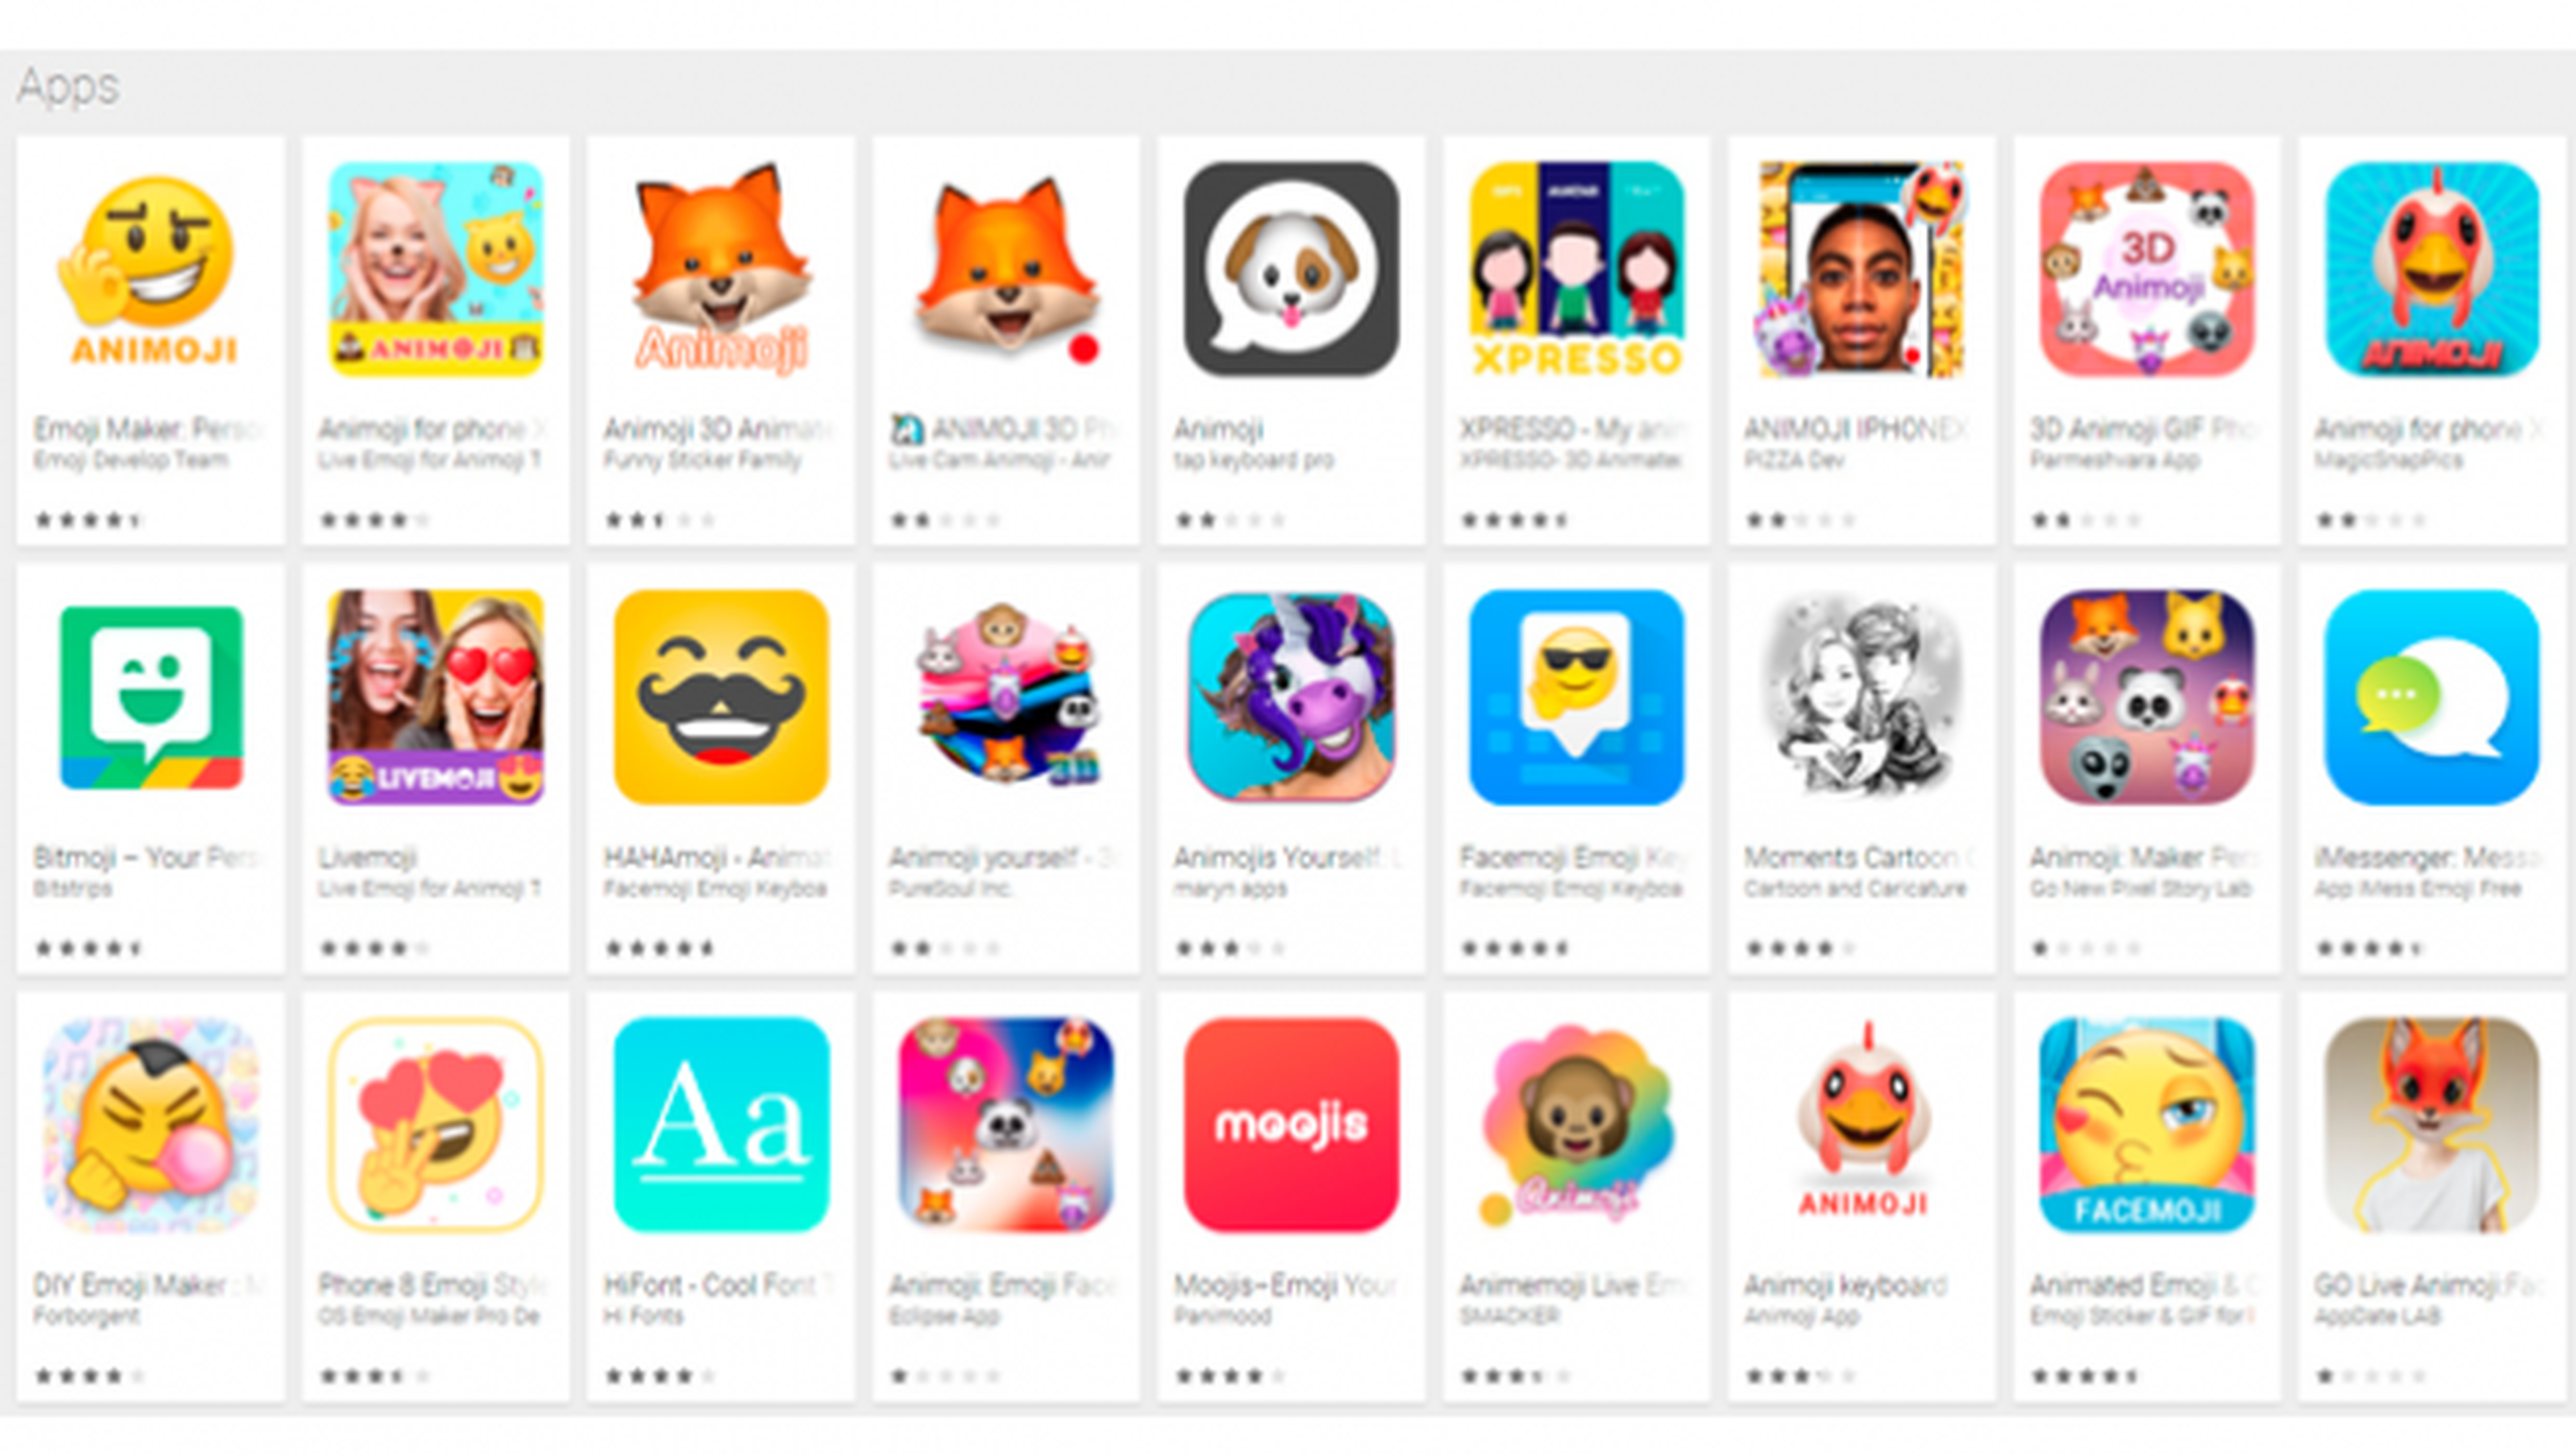 Mejores apps animojis móviles Android Google Play